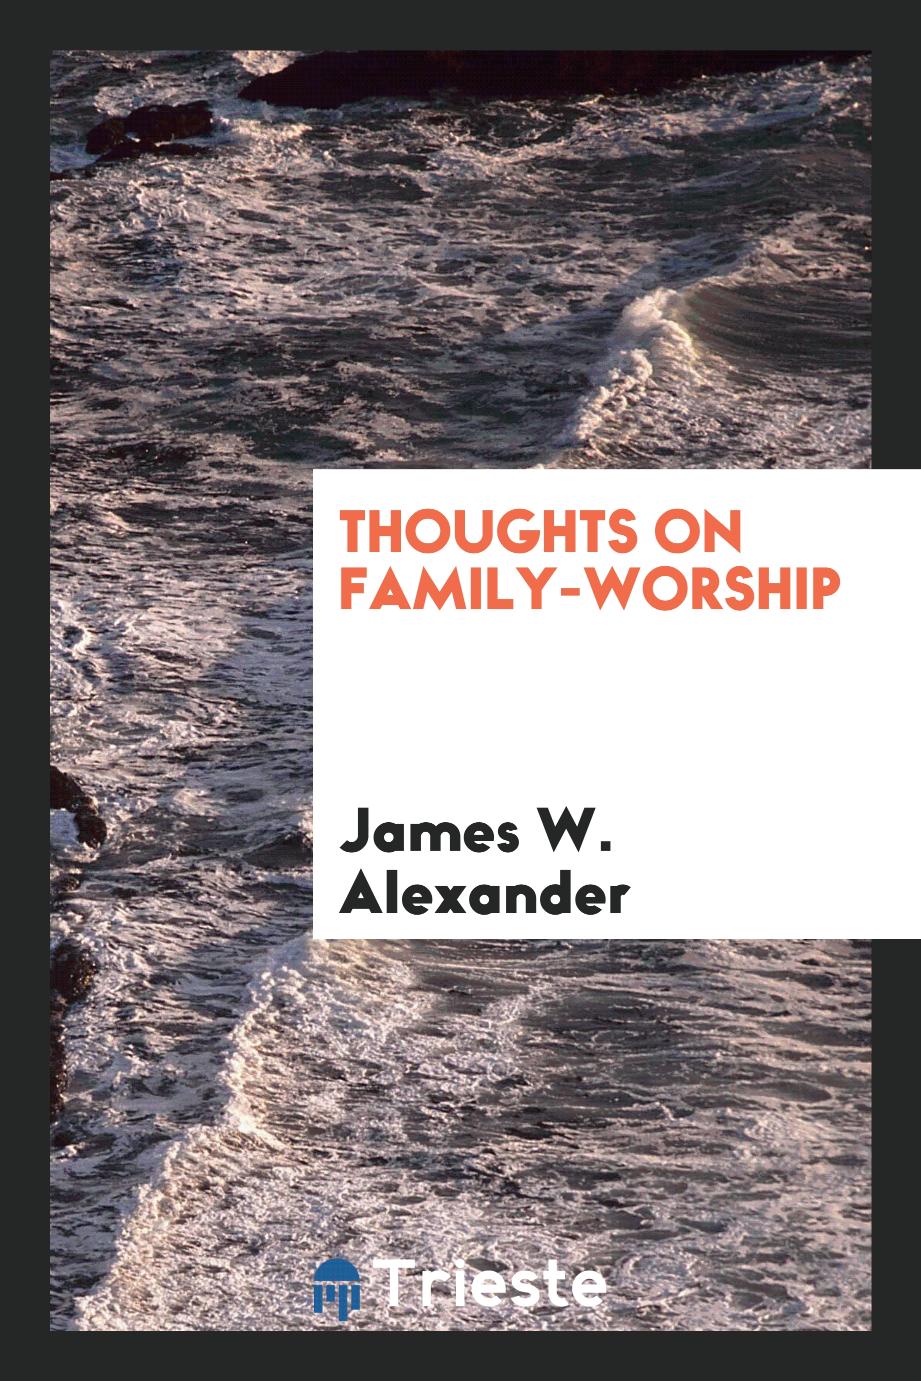 Thoughts on family-worship